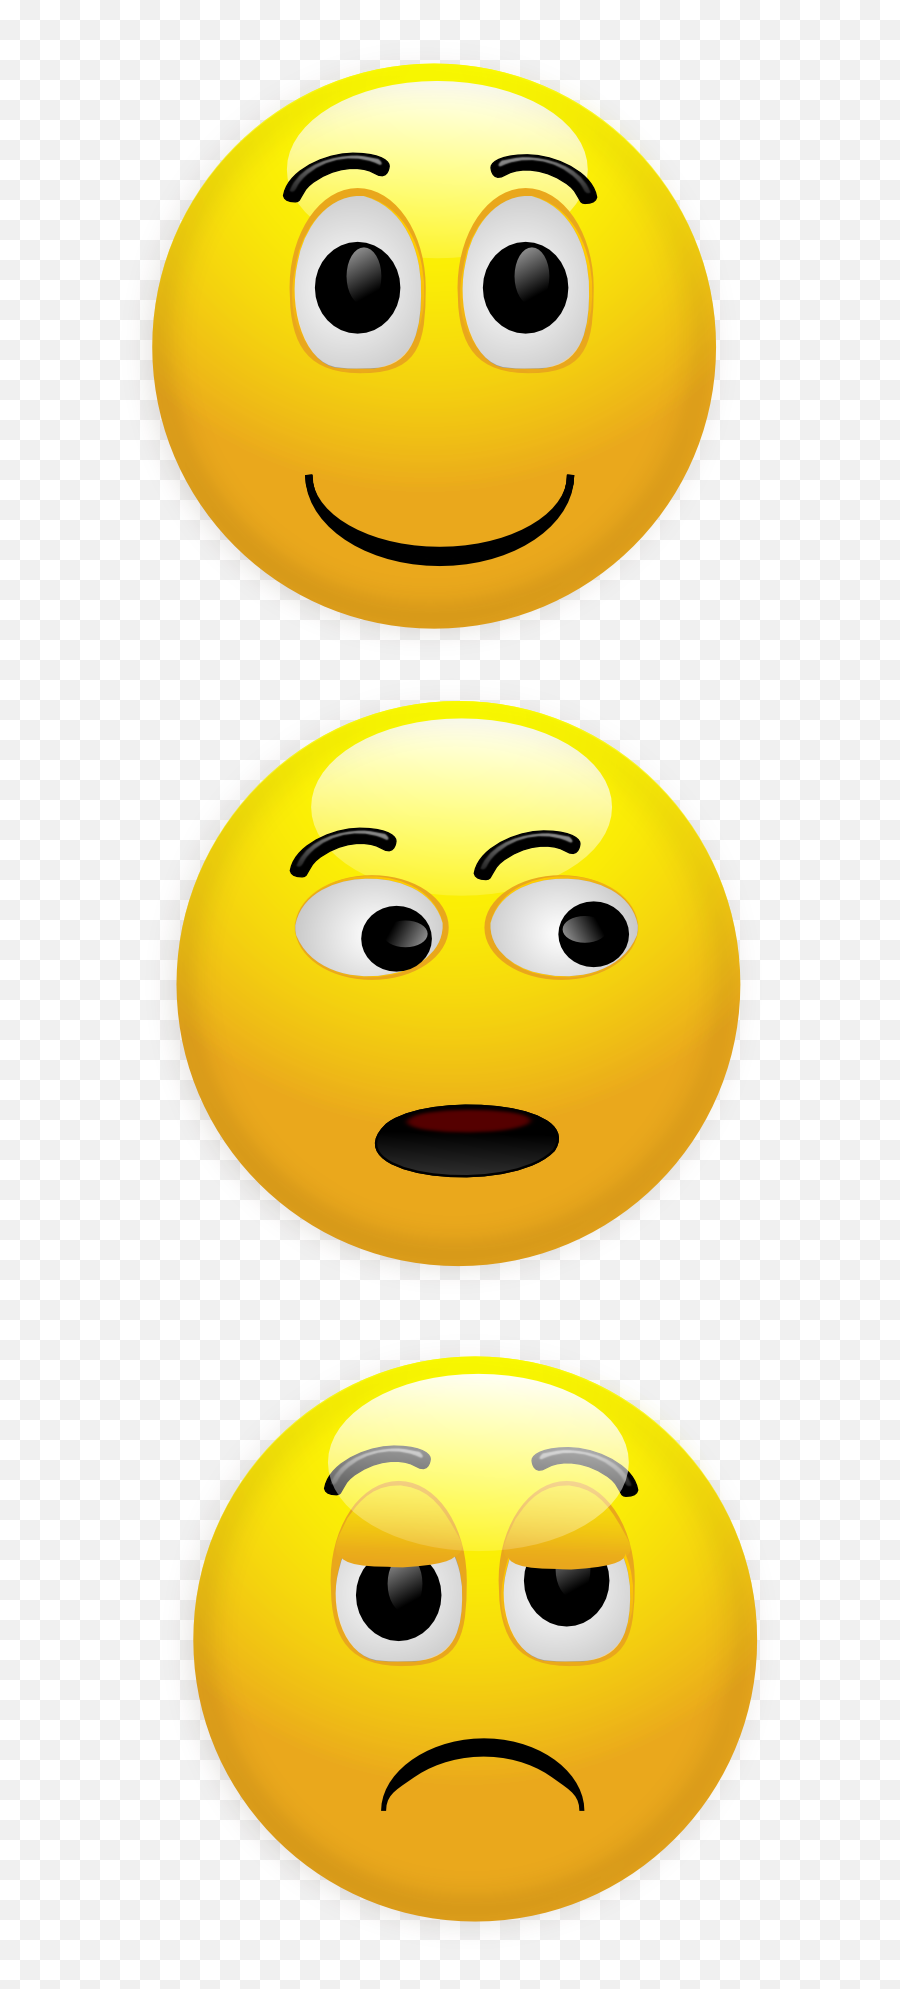 Why Are The Bi Consumers Not Only Happy - Cubeserv Sap Happy Smiley Emoji,Running Away Emoticon